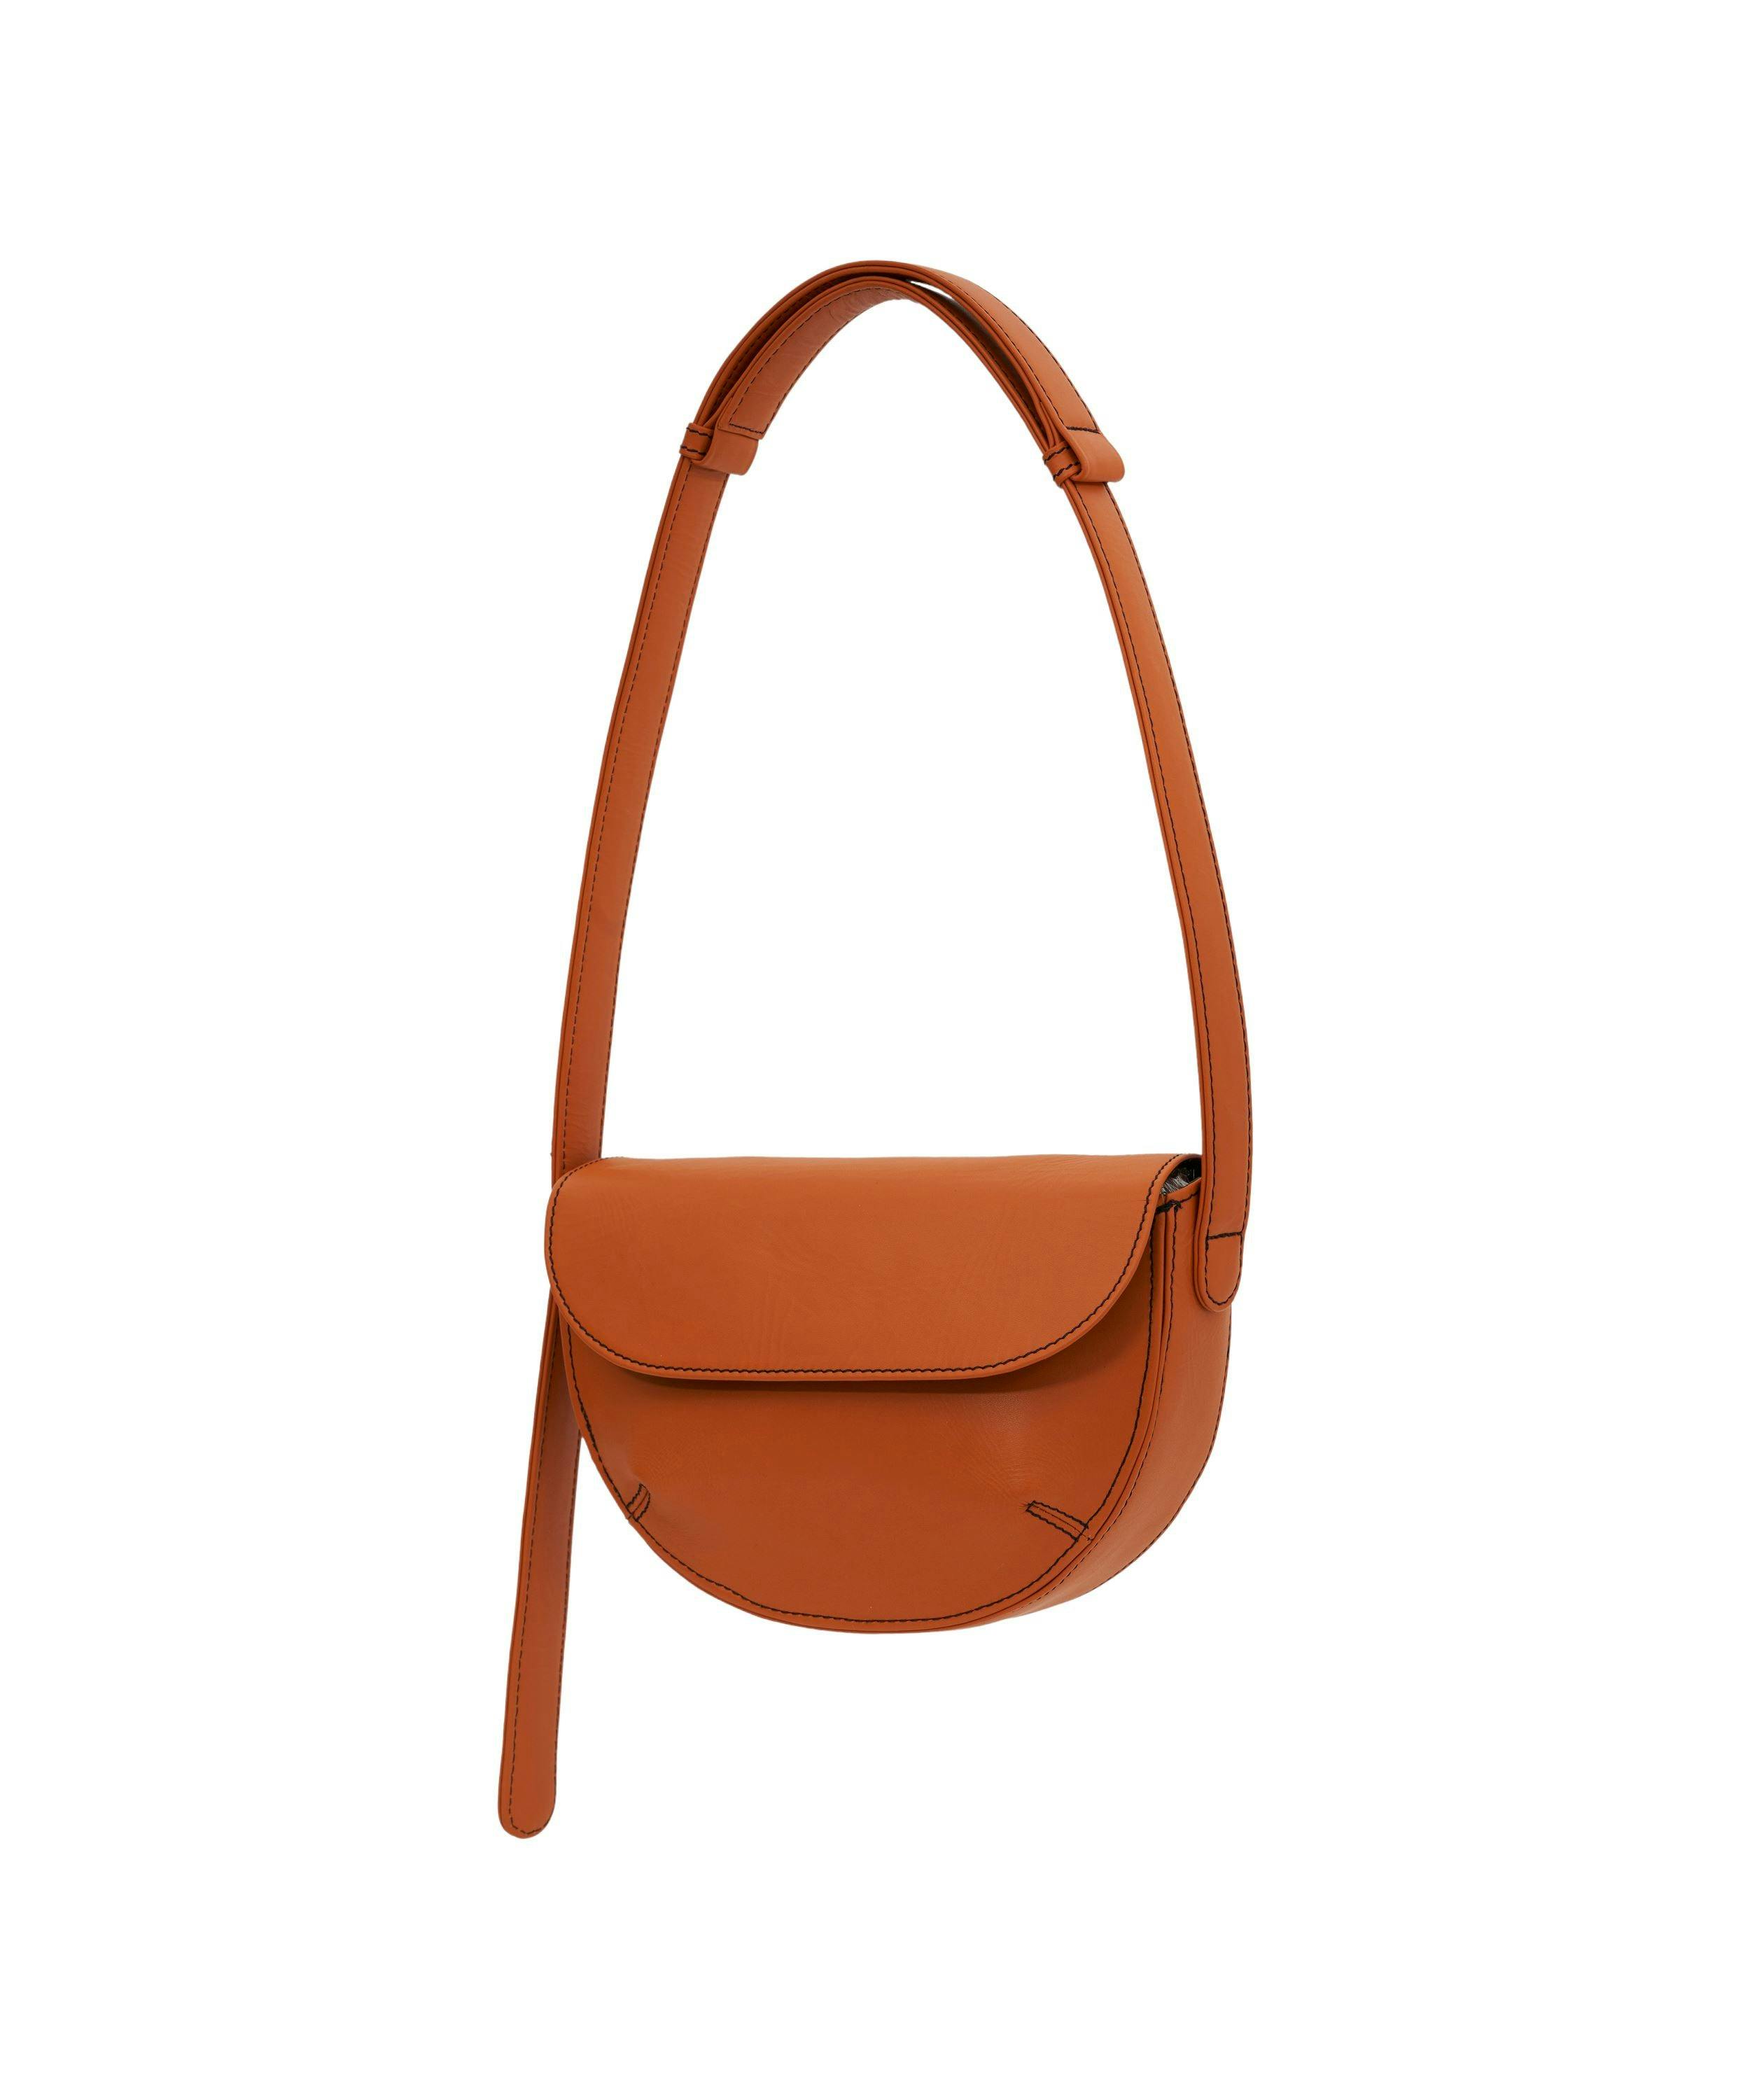 Billie Bag in Brick Red, a product by Mistry 